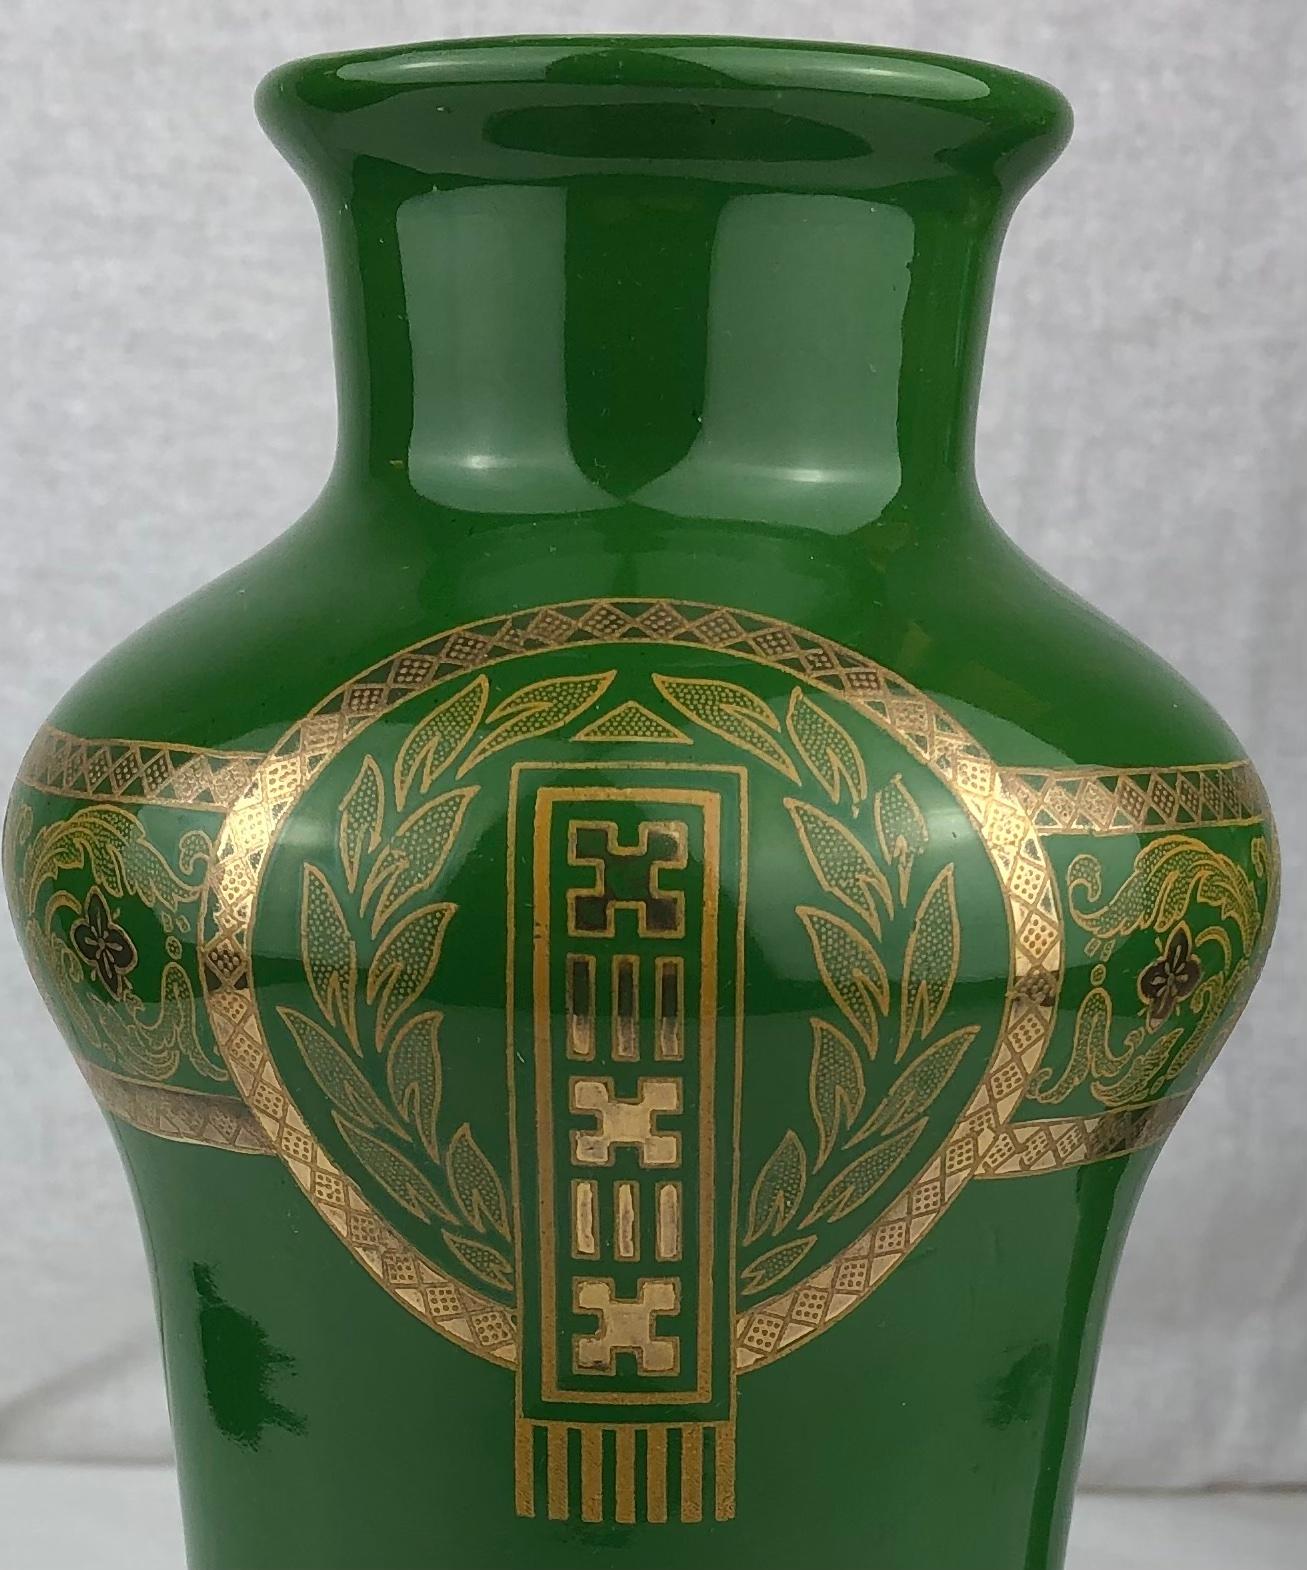 Pair of French Art Deco Porcelain Vases by Sarreguemines Green & Gold For Sale 3